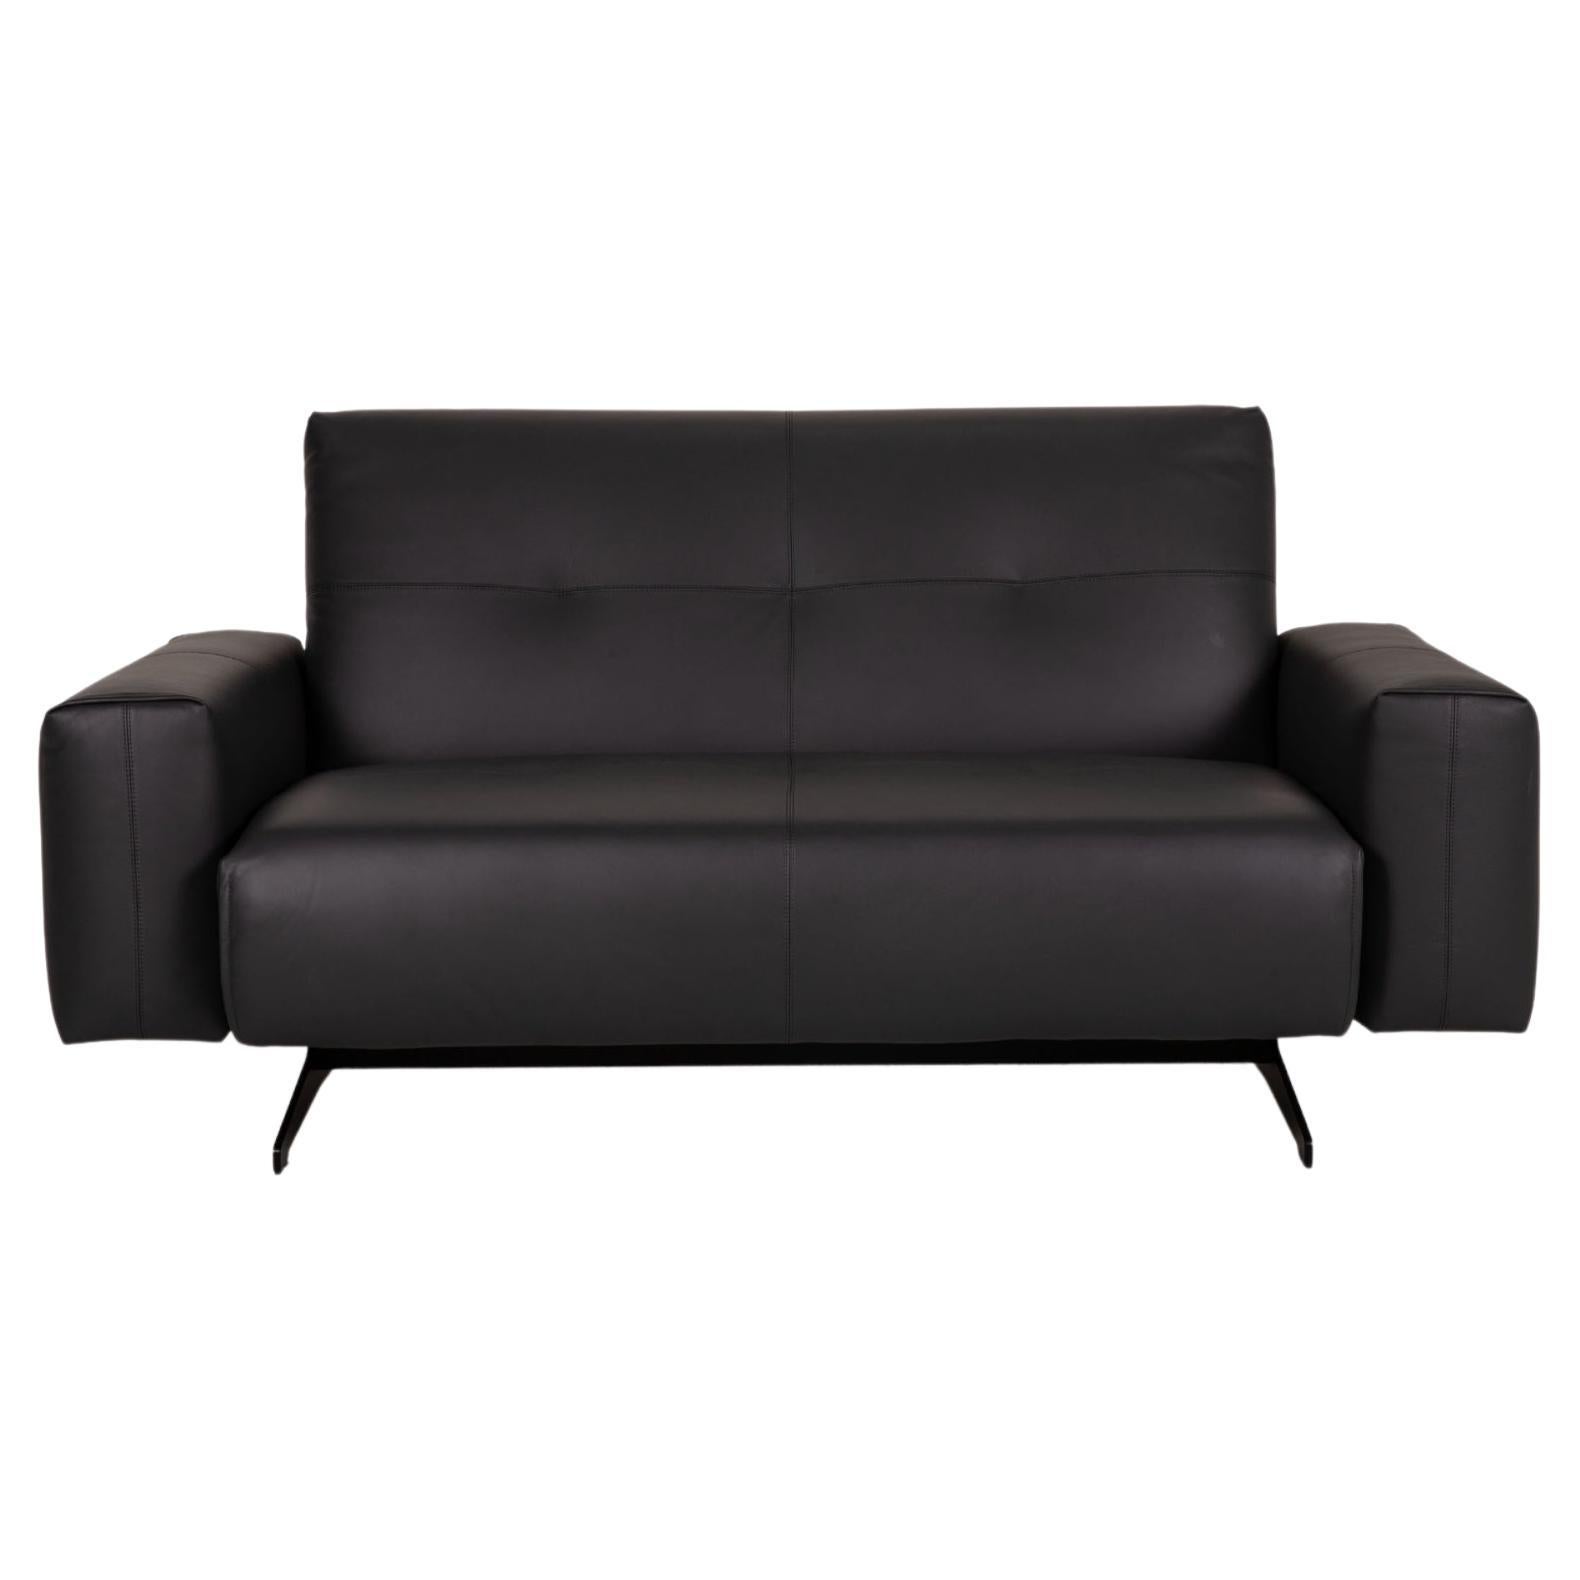 Rolf Benz 50 Leather Sofa Black Two-Seater Couch For Sale